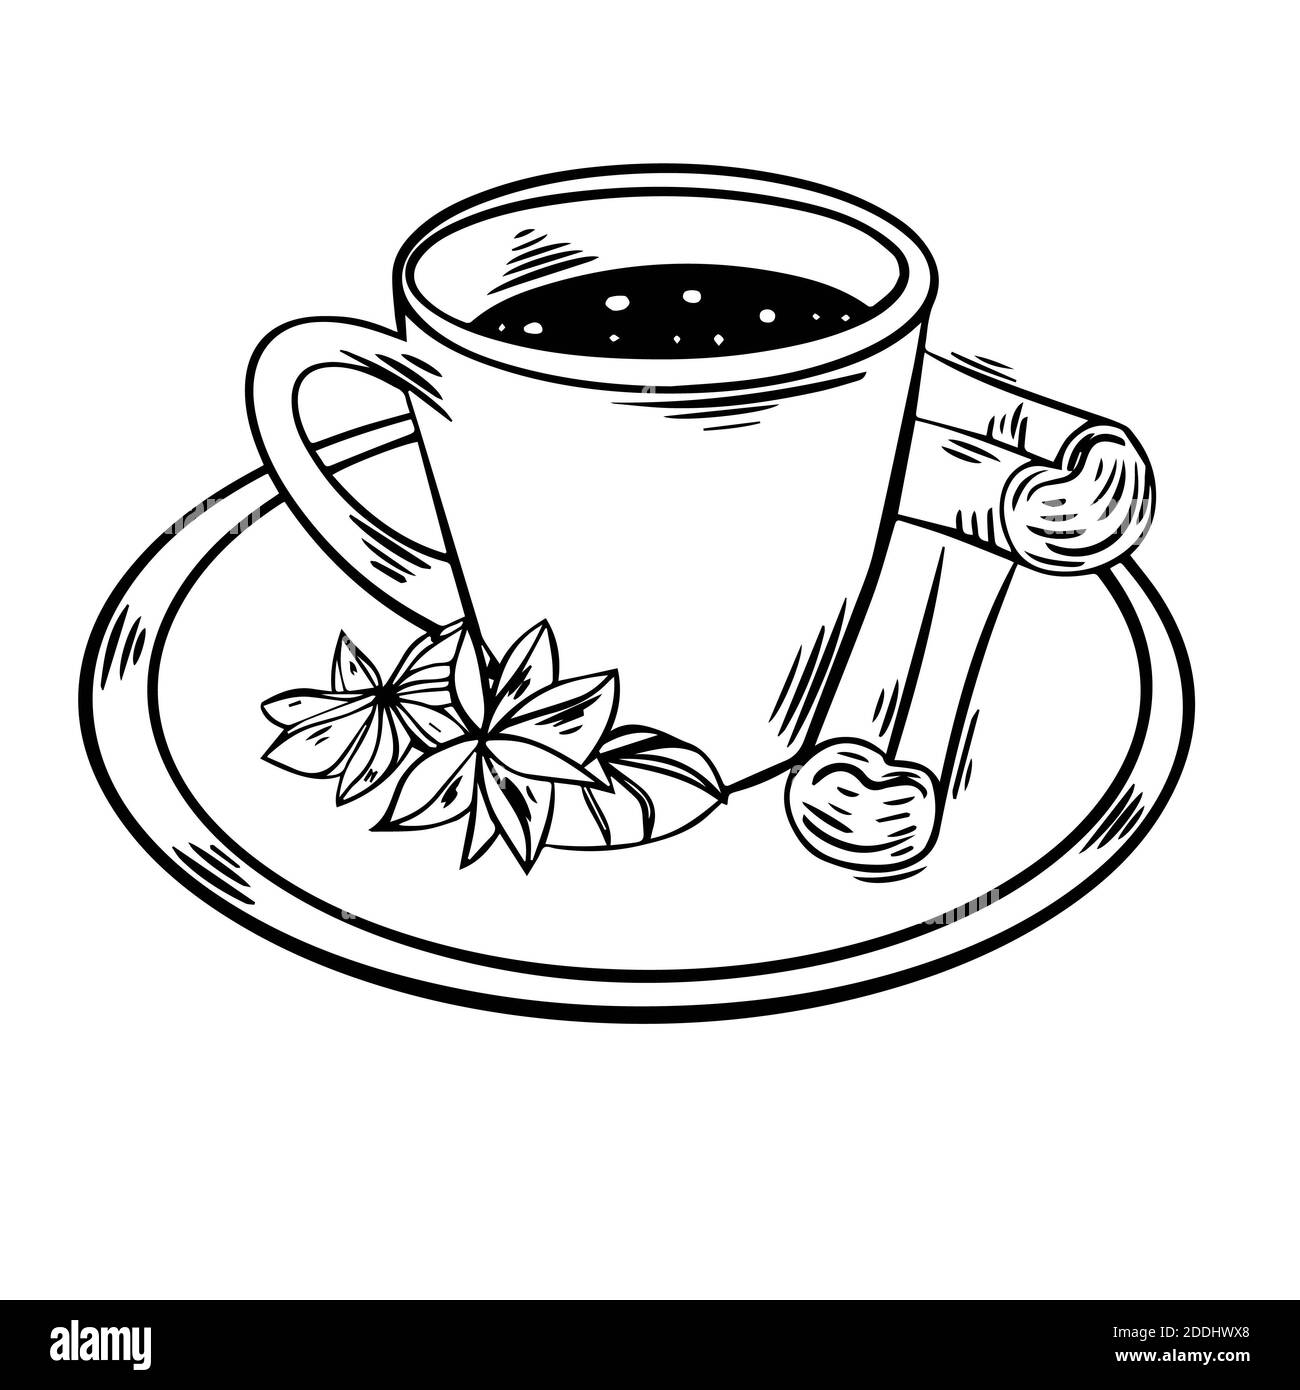 Illustration of a cup of black coffee with cinnamoon. Vector line illustration on white background. Can be used in interior design of cafes, restauran Stock Photo